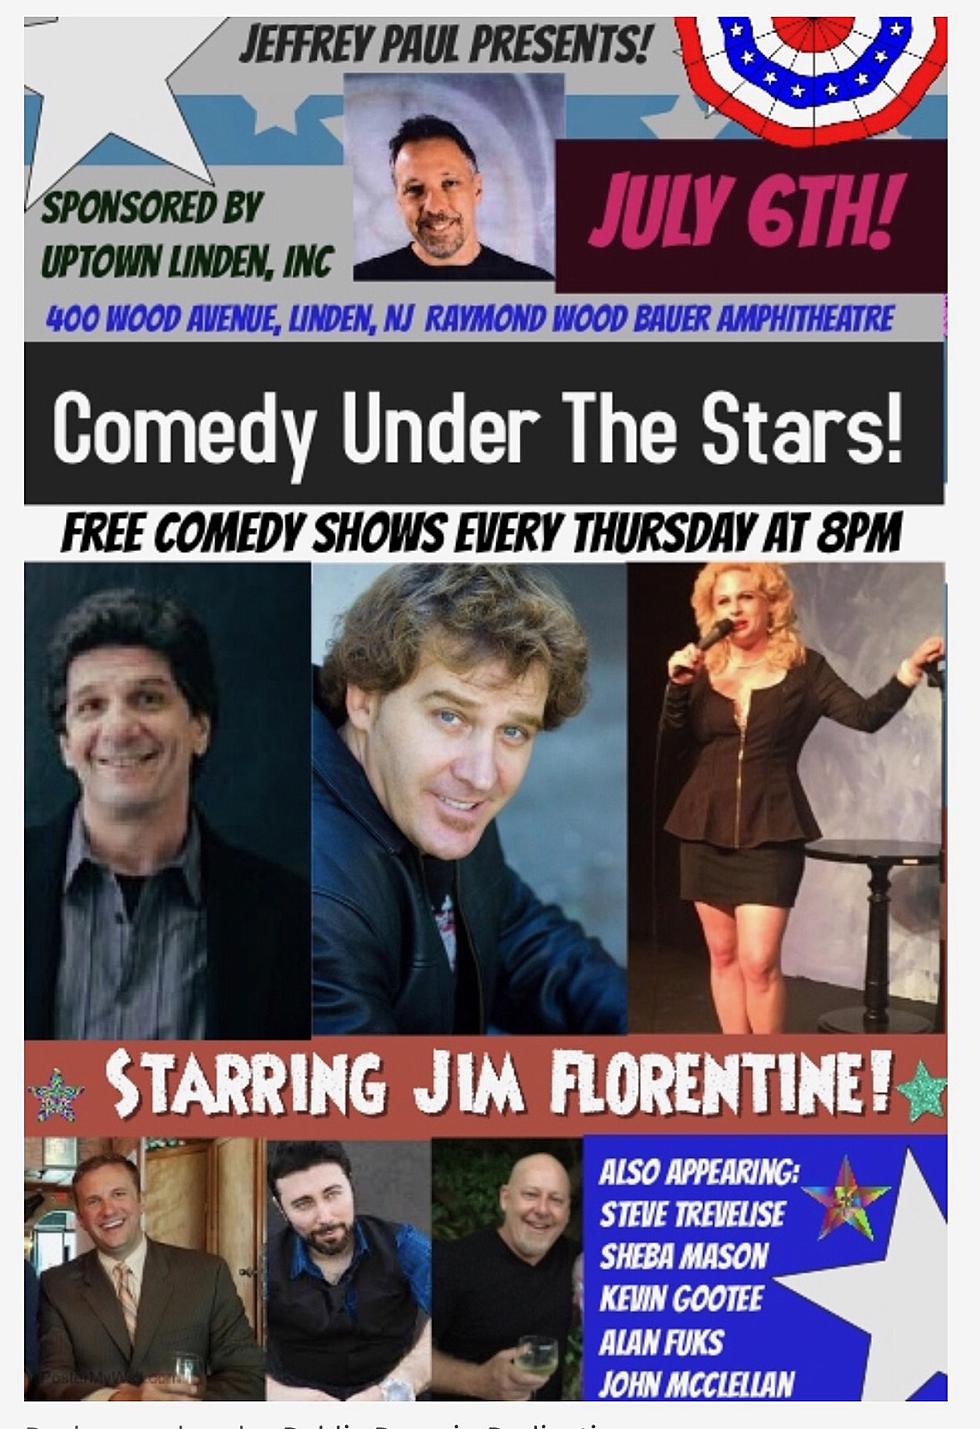 Free comedy in Linden New Jersey!